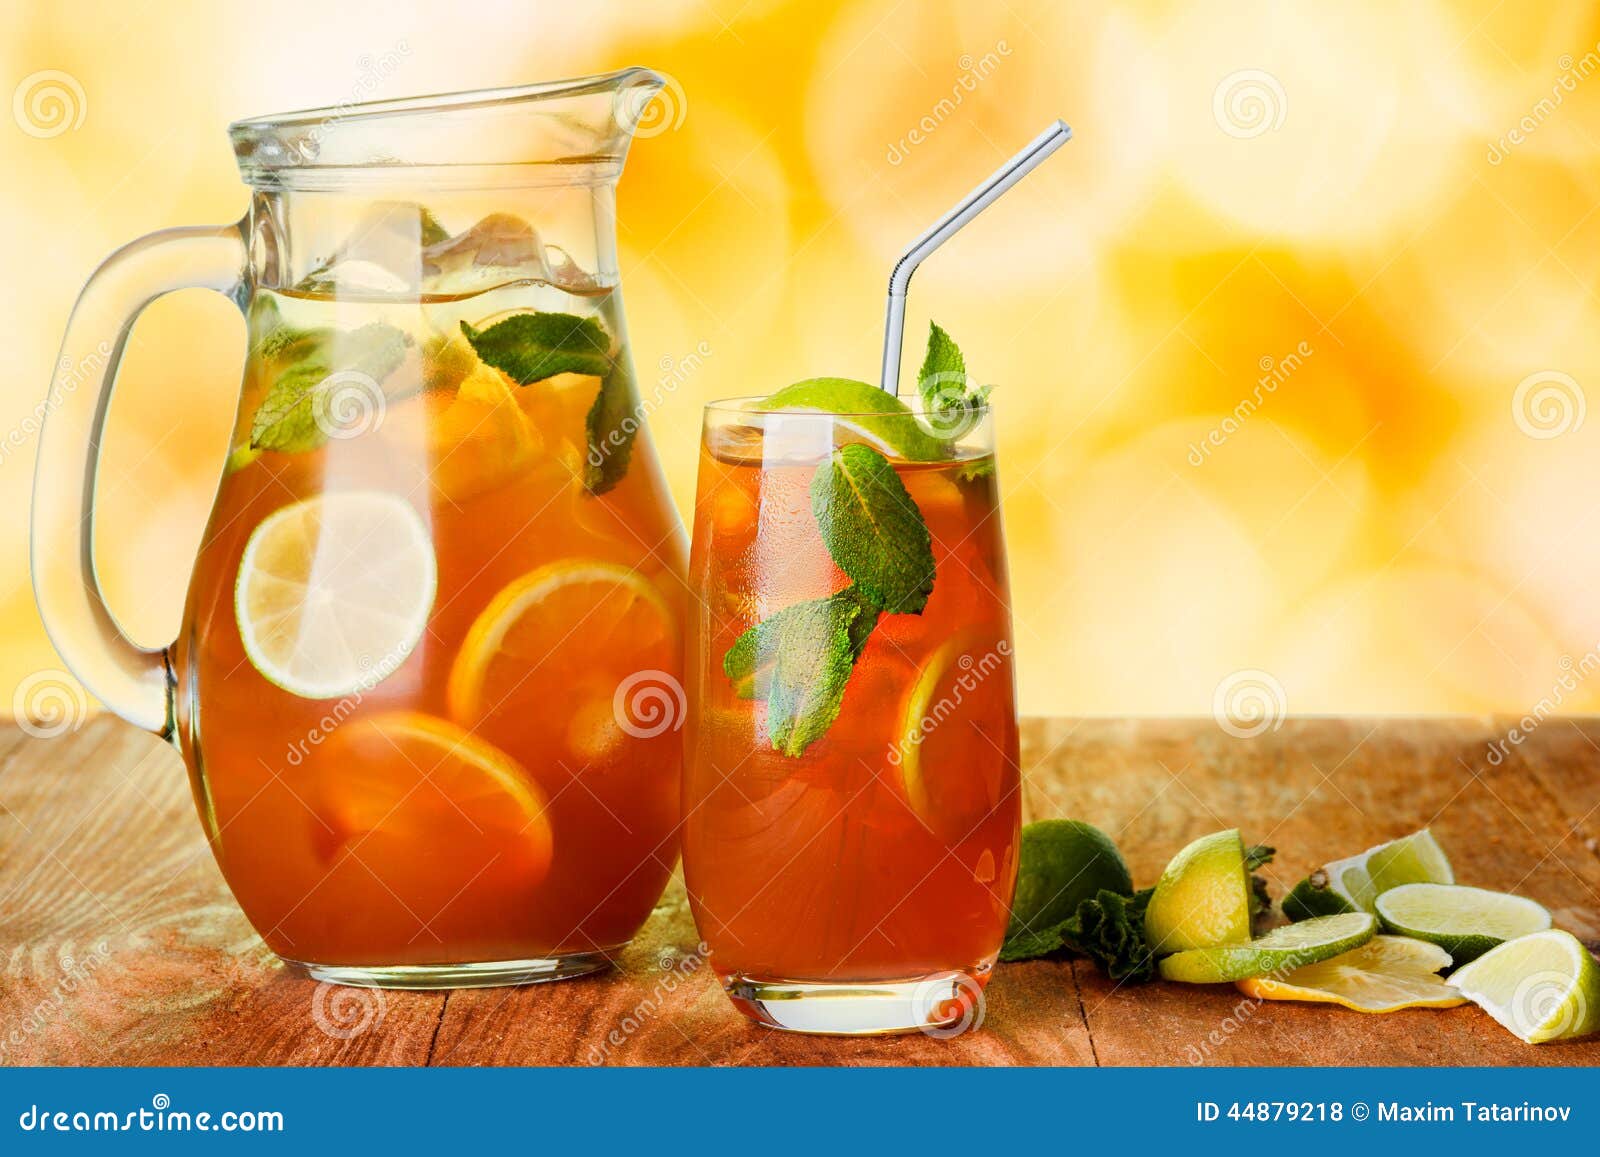 https://thumbs.dreamstime.com/z/iced-tea-pitcher-glass-jug-cold-drink-lemon-mint-wooden-table-over-abstract-background-44879218.jpg